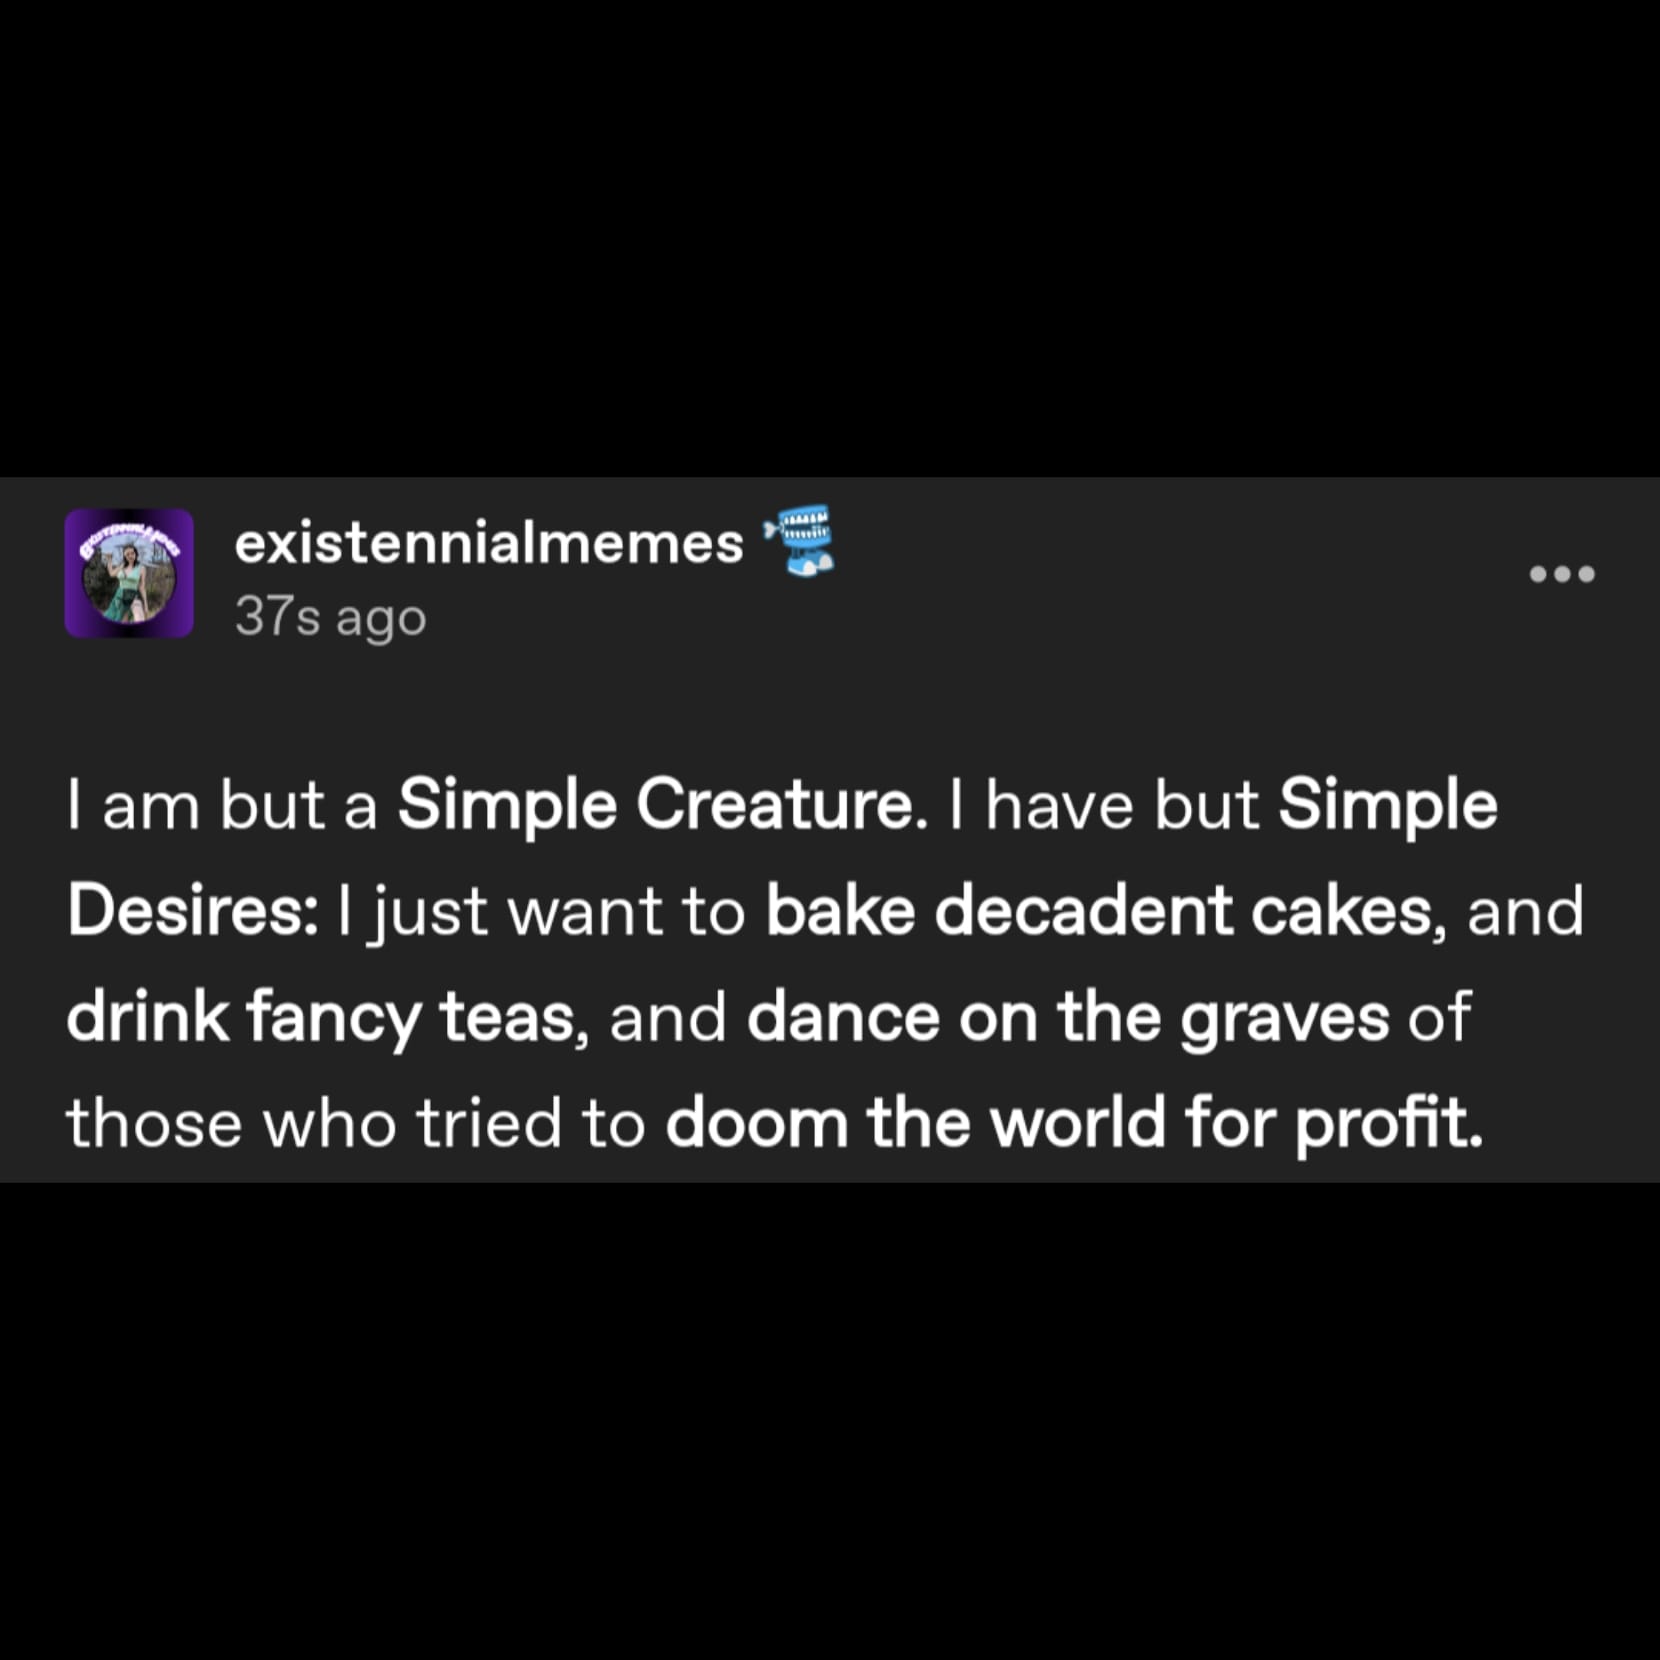 a tumblr post by user existennialmemes that reads: I am but a Simple Creature. I have but Simple Desires: I just want to bake decadent cakes, and drink fancy teas, and dance on the graves of those who tried to doom the world for profit.